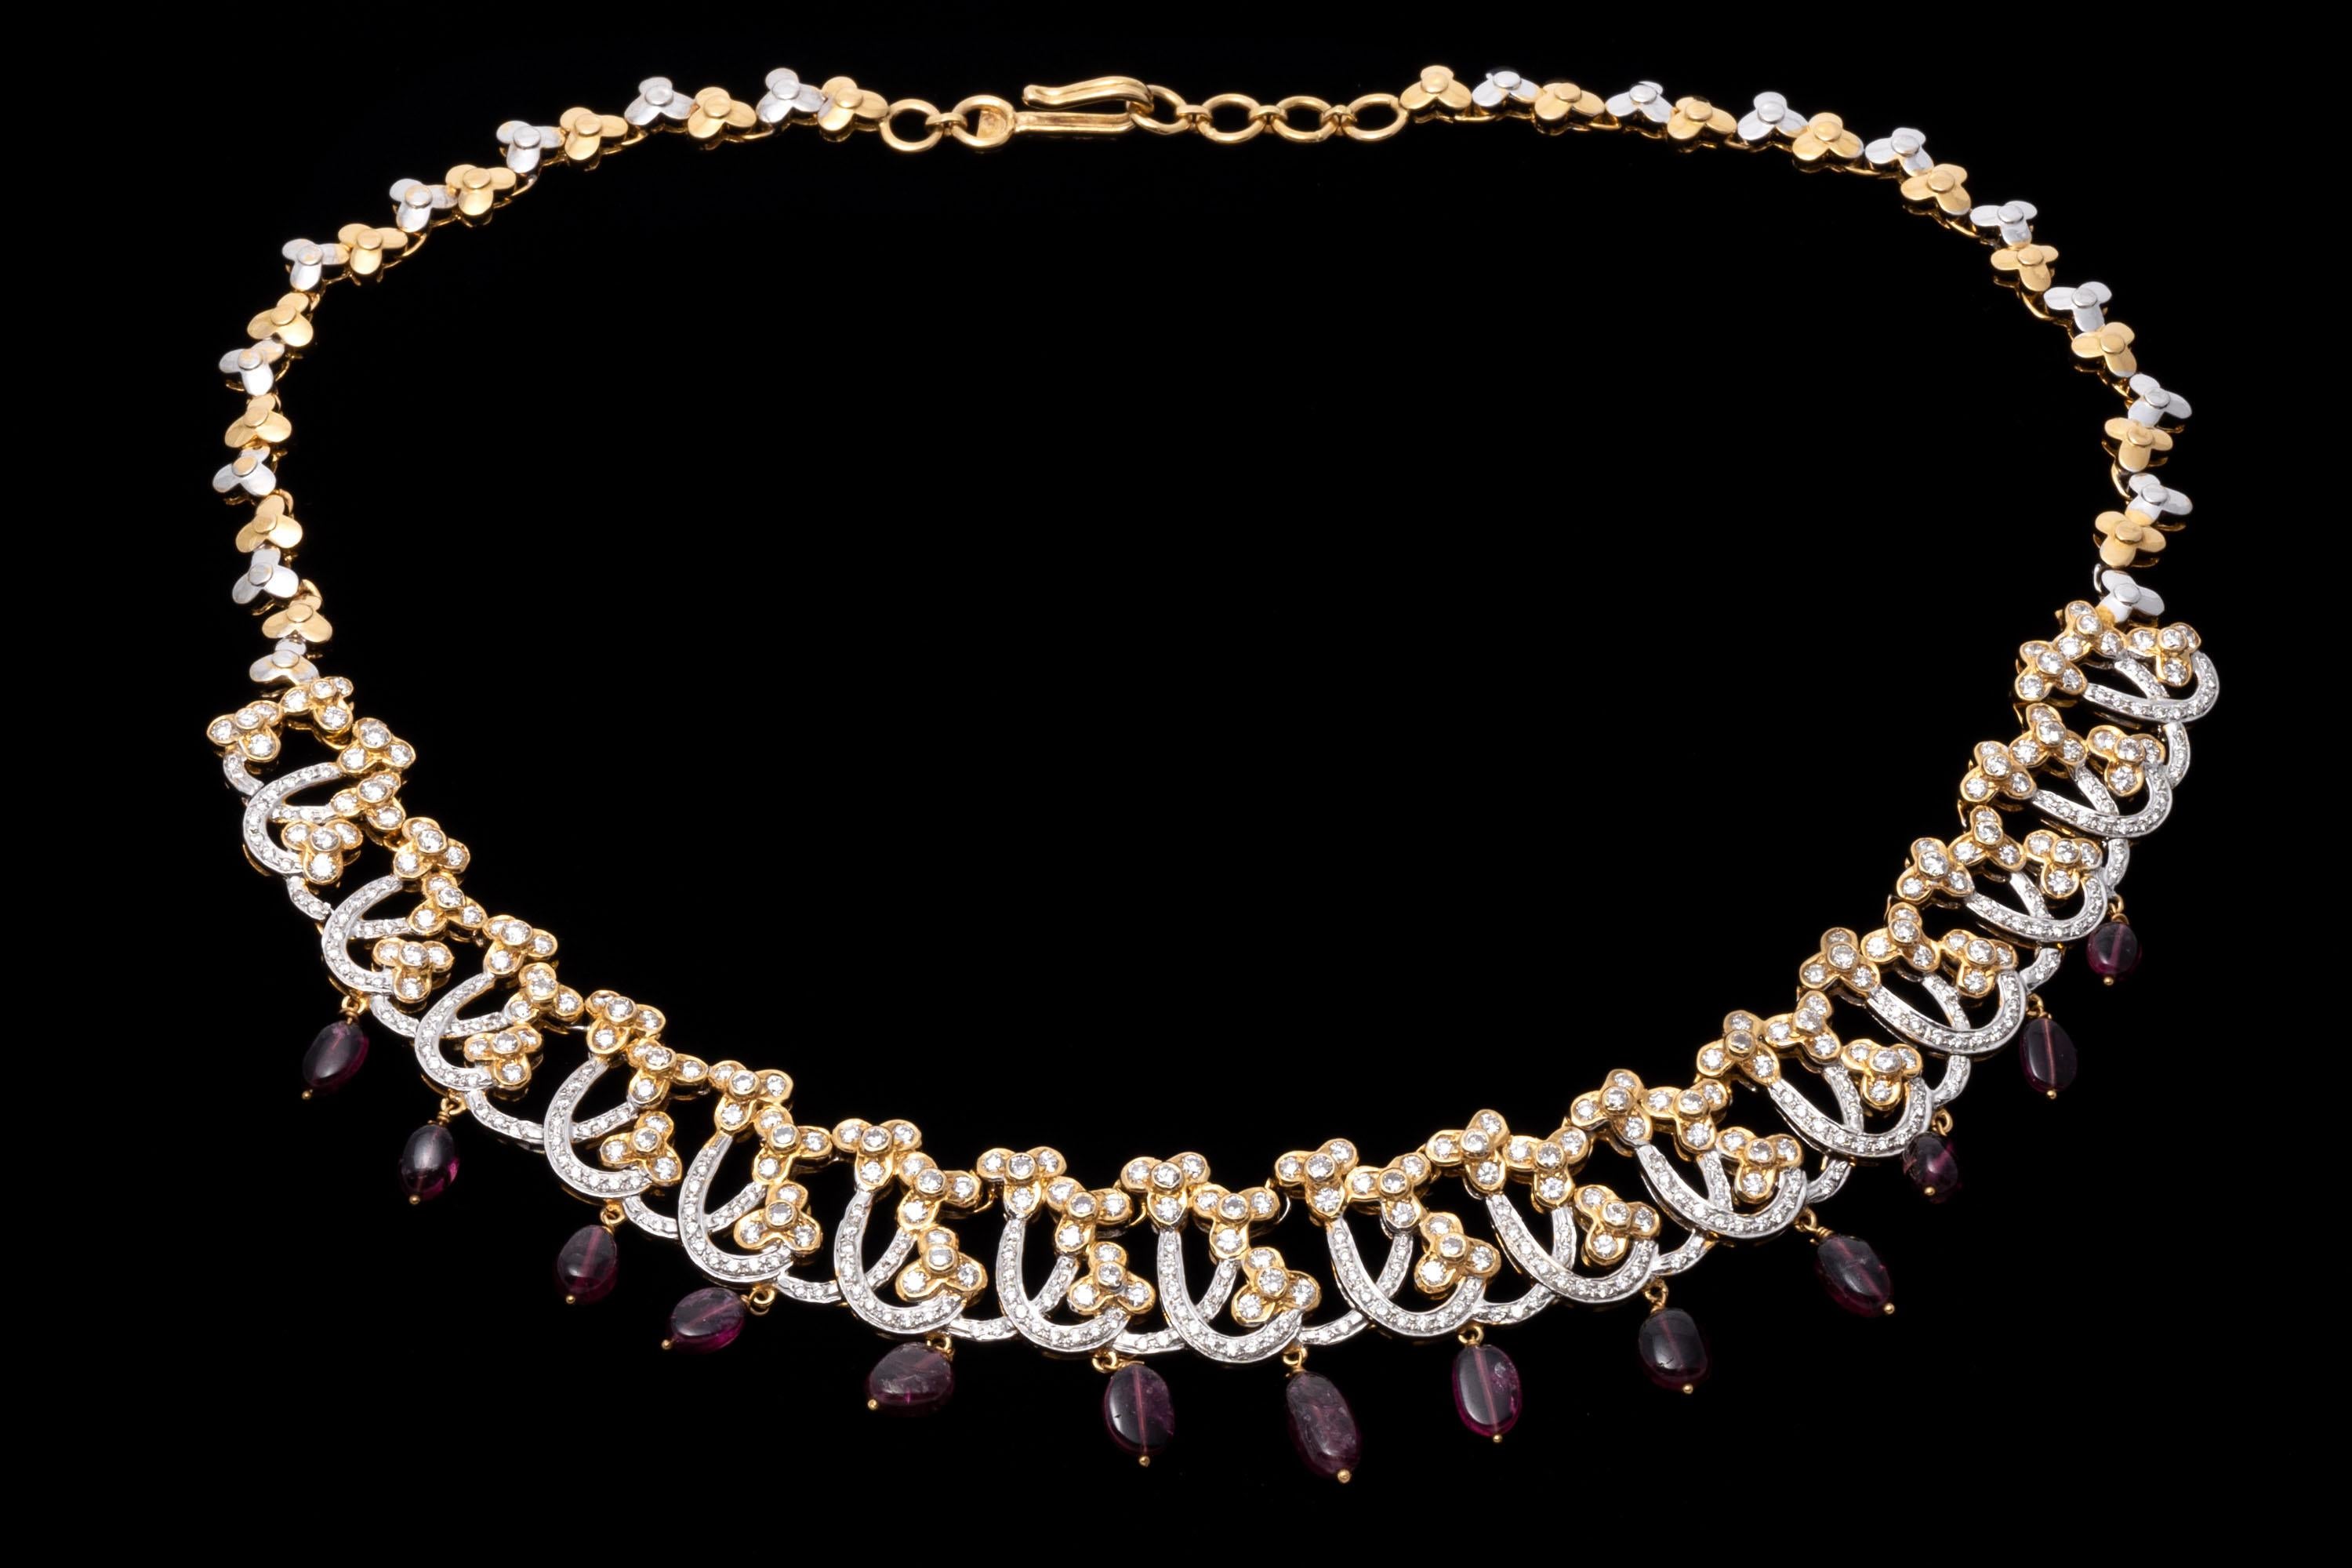 This 18K yellow gold necklace presents a dynamic design with and opulent frosting of round faceted diamonds. Suspended from the necklace are a fringe of pink tourmaline beads, adding a colorful touch to the piece. Diamonds are approximately 8.0 TCW.